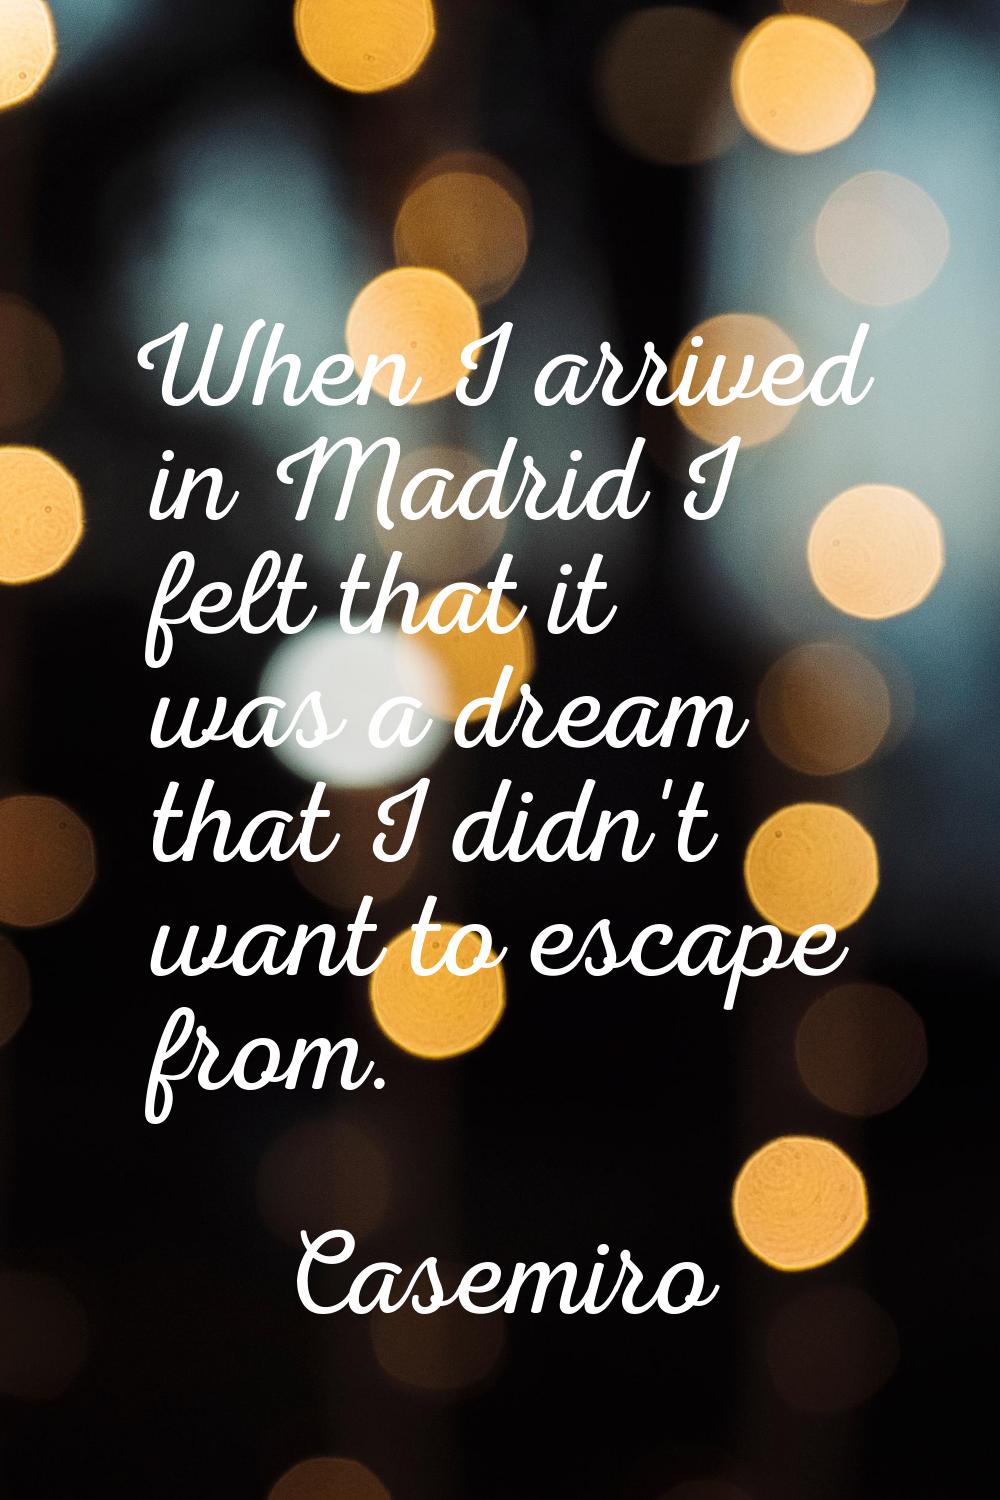 When I arrived in Madrid I felt that it was a dream that I didn't want to escape from.